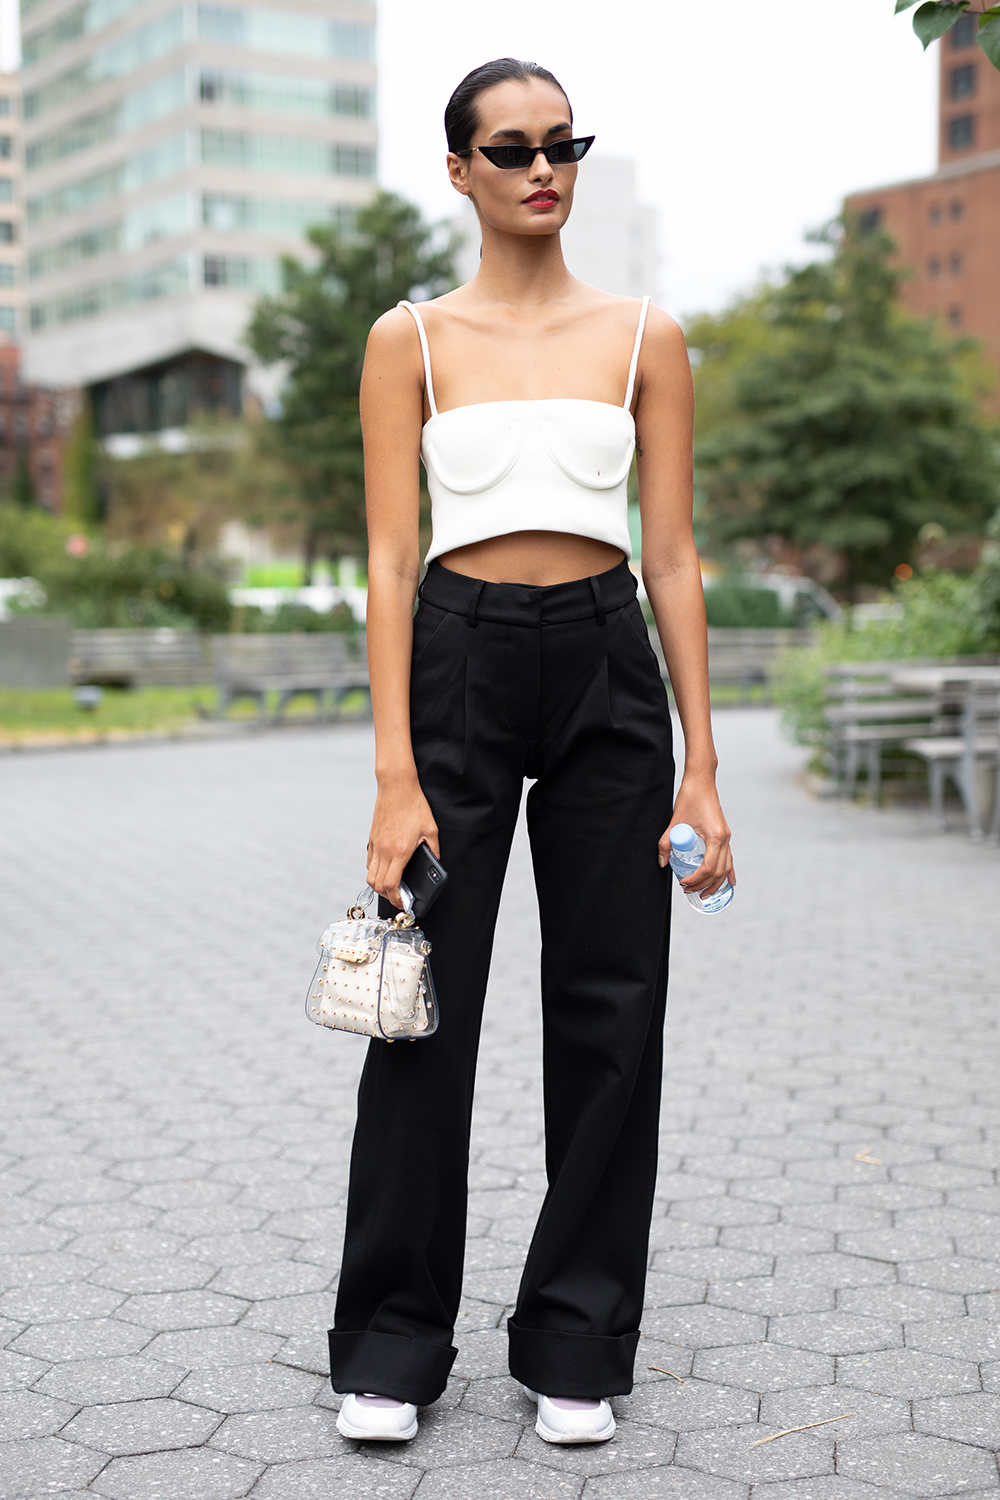 NEW YORK, NY - SEPTEMBER 07: Gizele Oliveira is seen on the street during New York Fashion Week SS19 wearing white top with black pants on September 7, 2018 in New York City. (Photo by Matthew Sperzel/Getty Images)